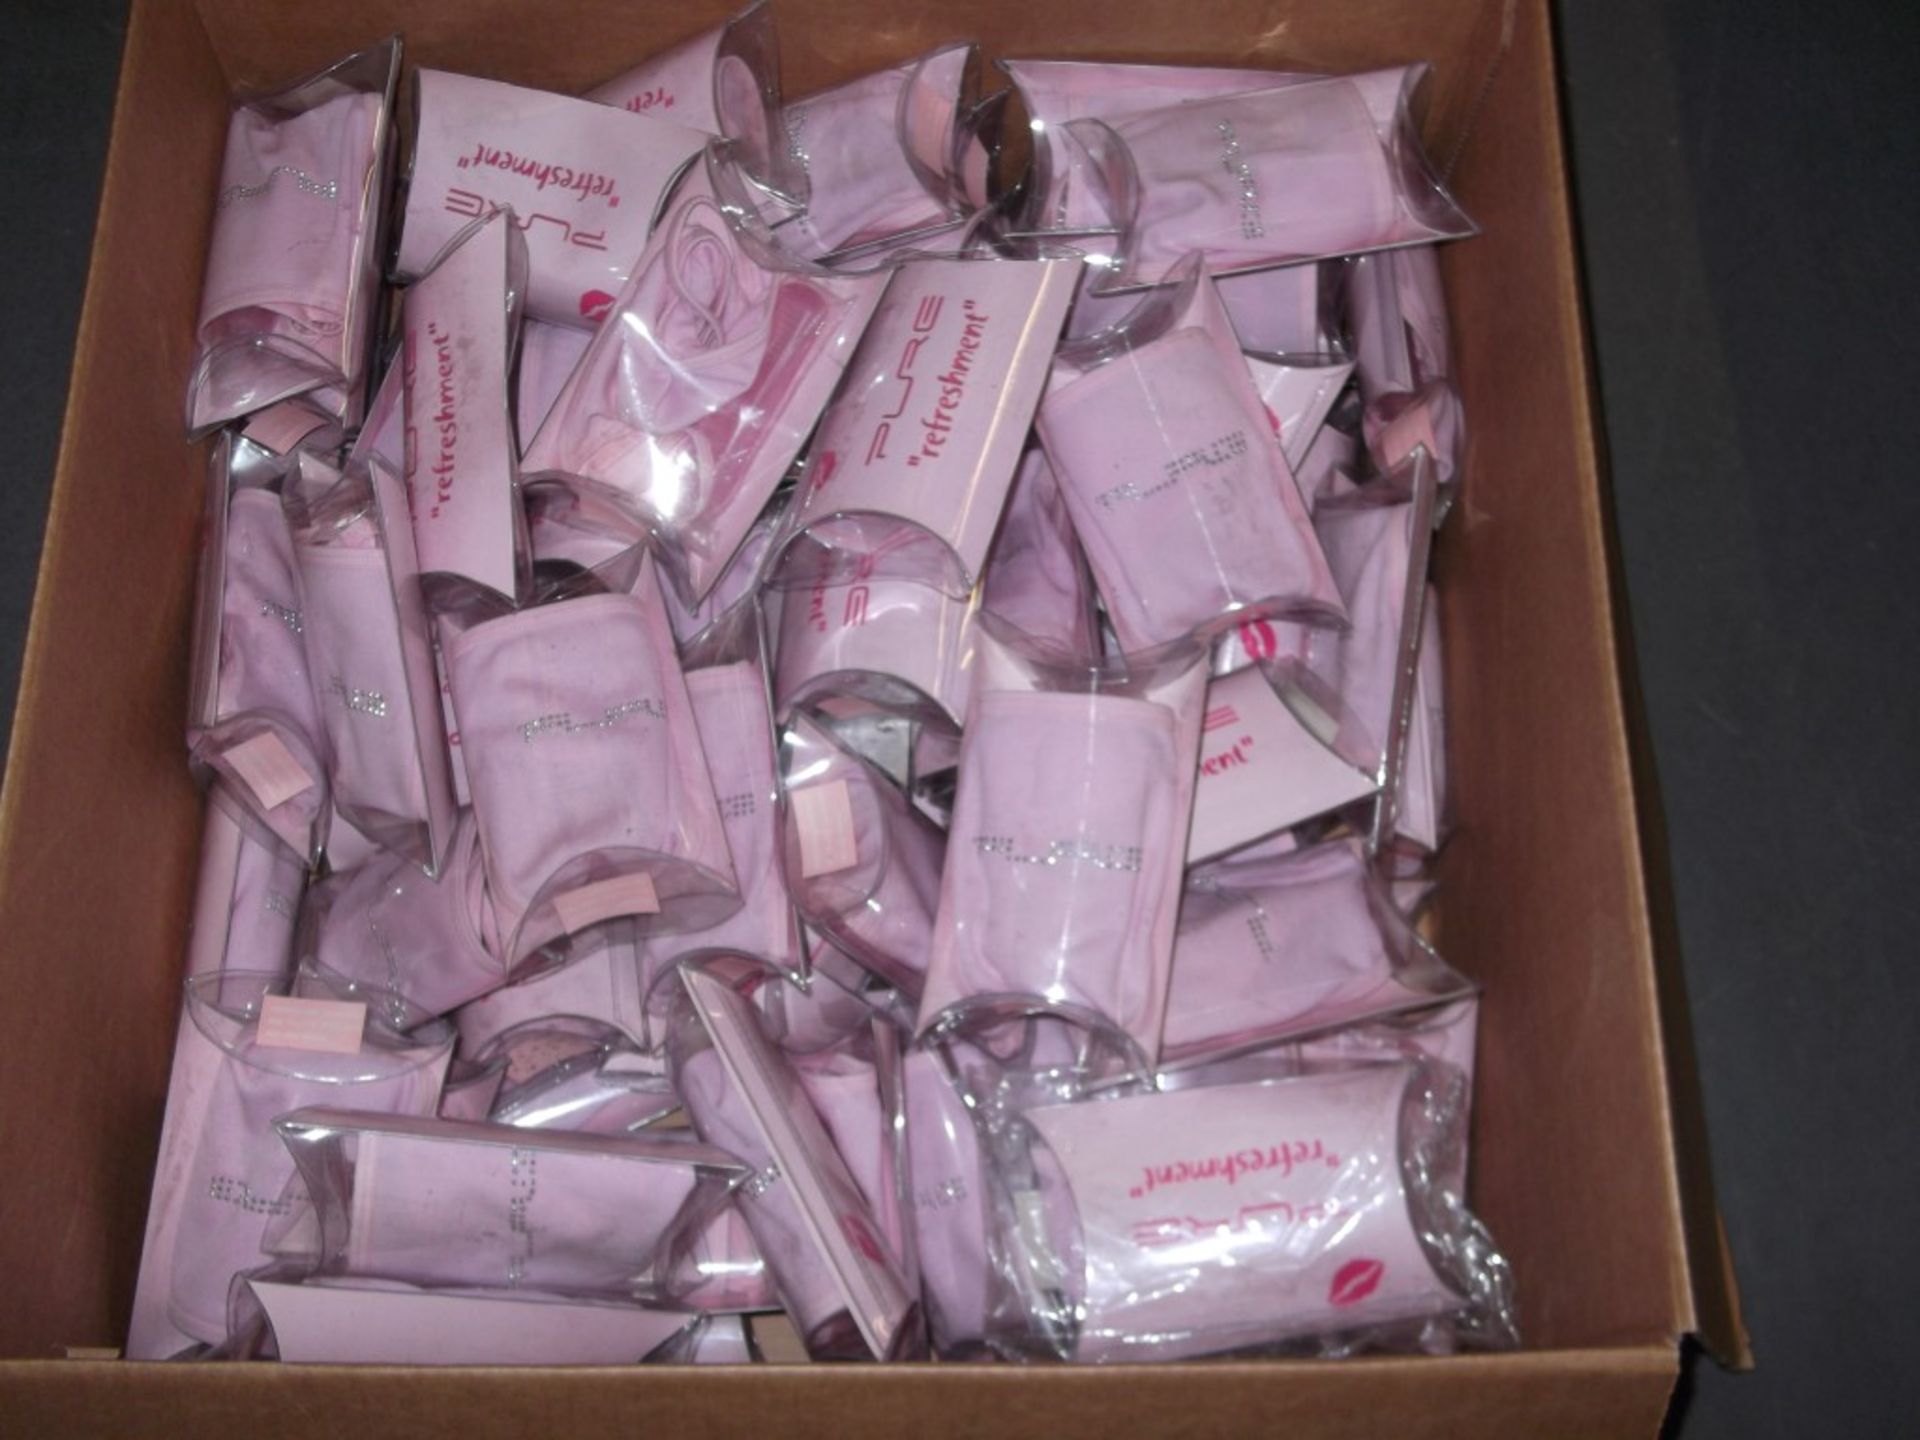 70 x Pink Thongs Individually Packaged - NJB067 - CL008 - Location: Bury BL9 - RRP £140  - NEW - Image 3 of 3